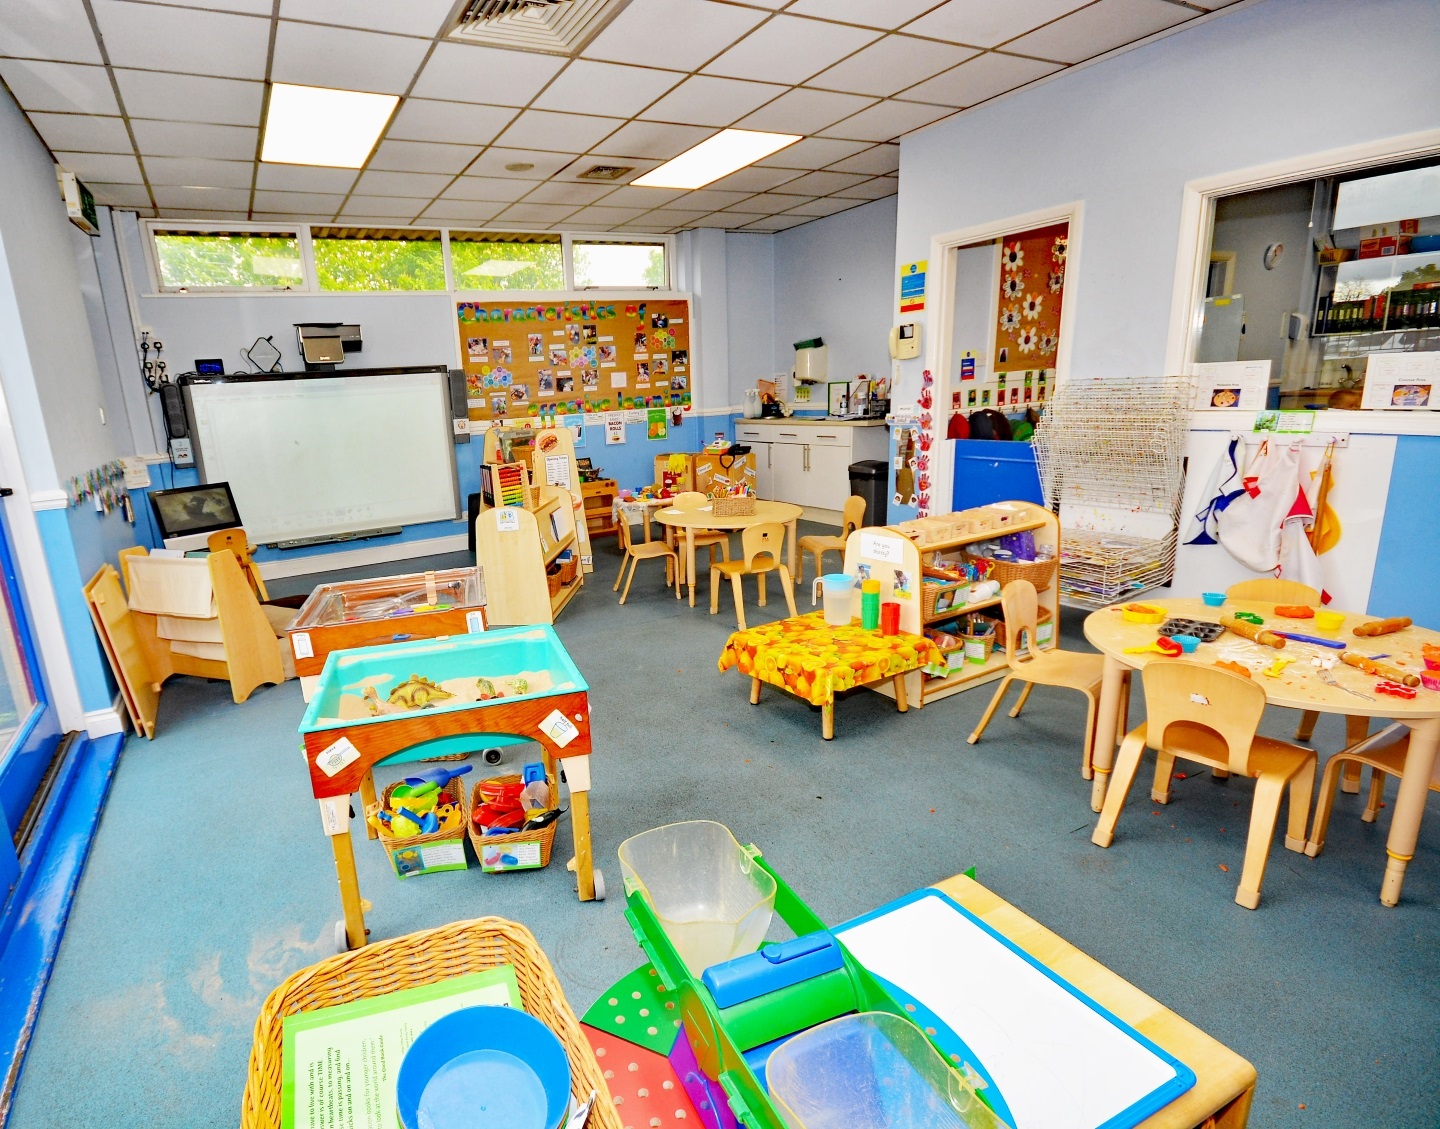 Bright Horizons Enfield Day Nursery and Preschool Enfield 03702 188980